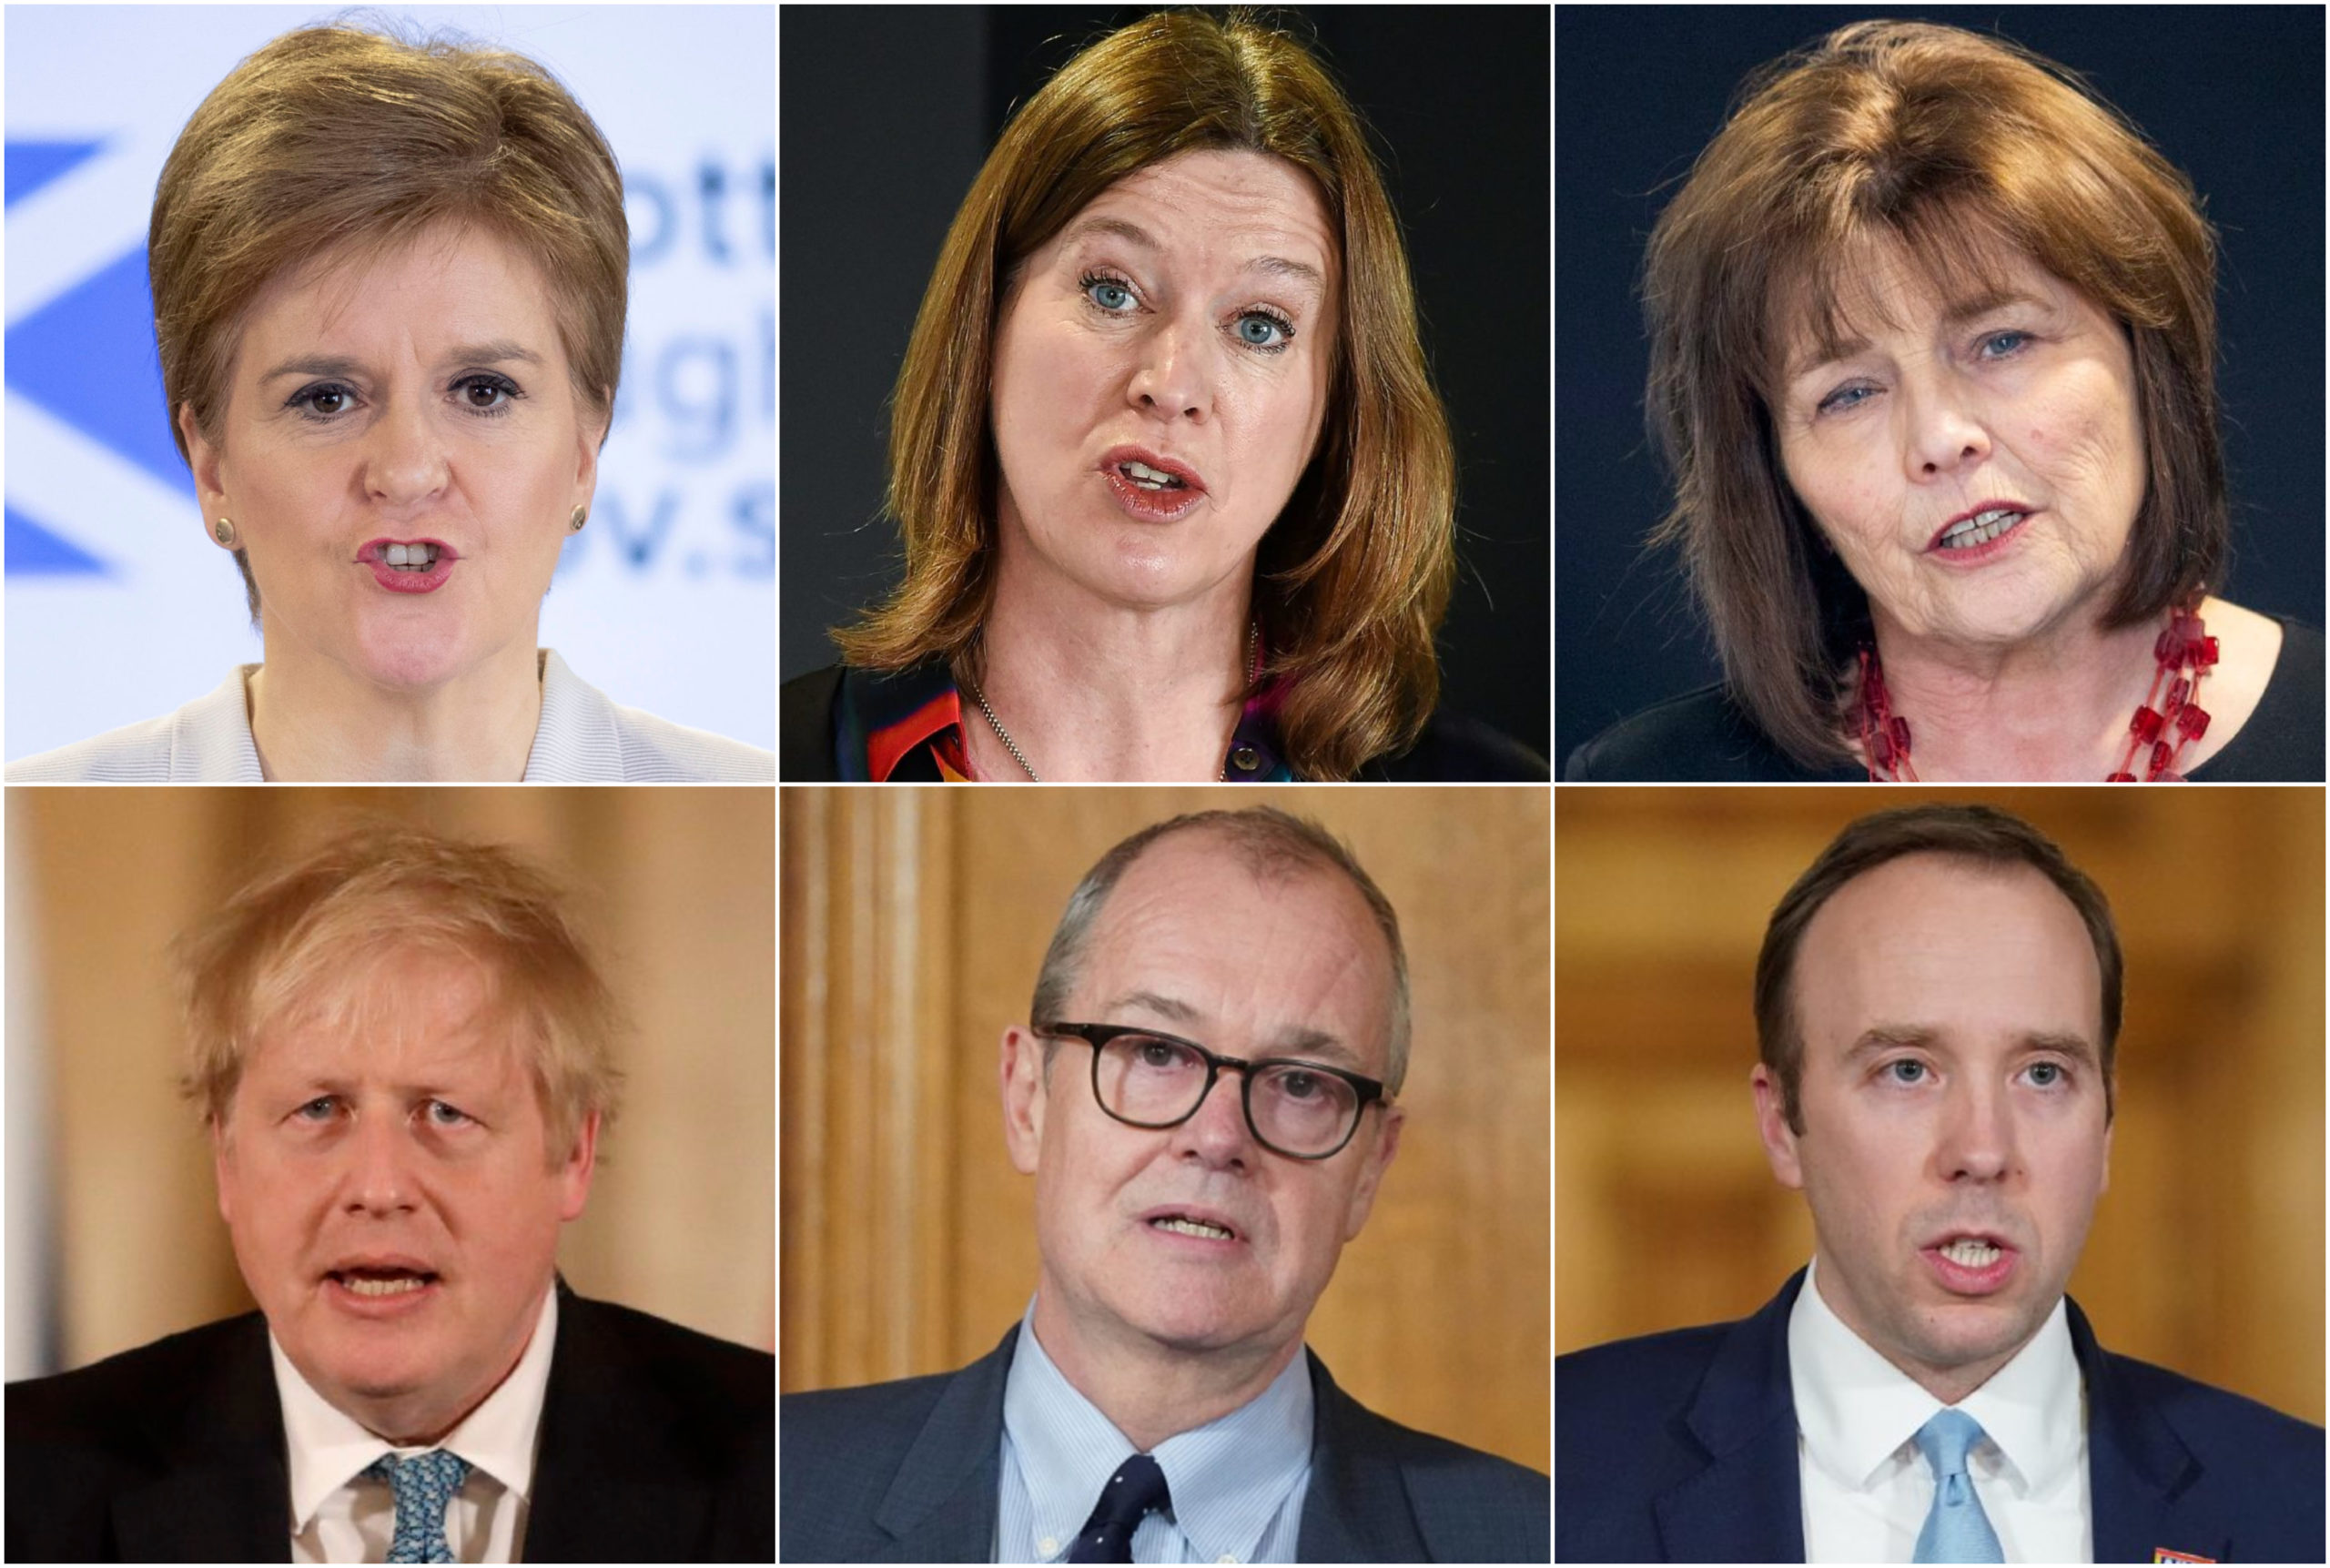 The public have been receiving advice from the political and medical leaders in Scotland and the UK — leading, at times, to confusion or lack of clarity.